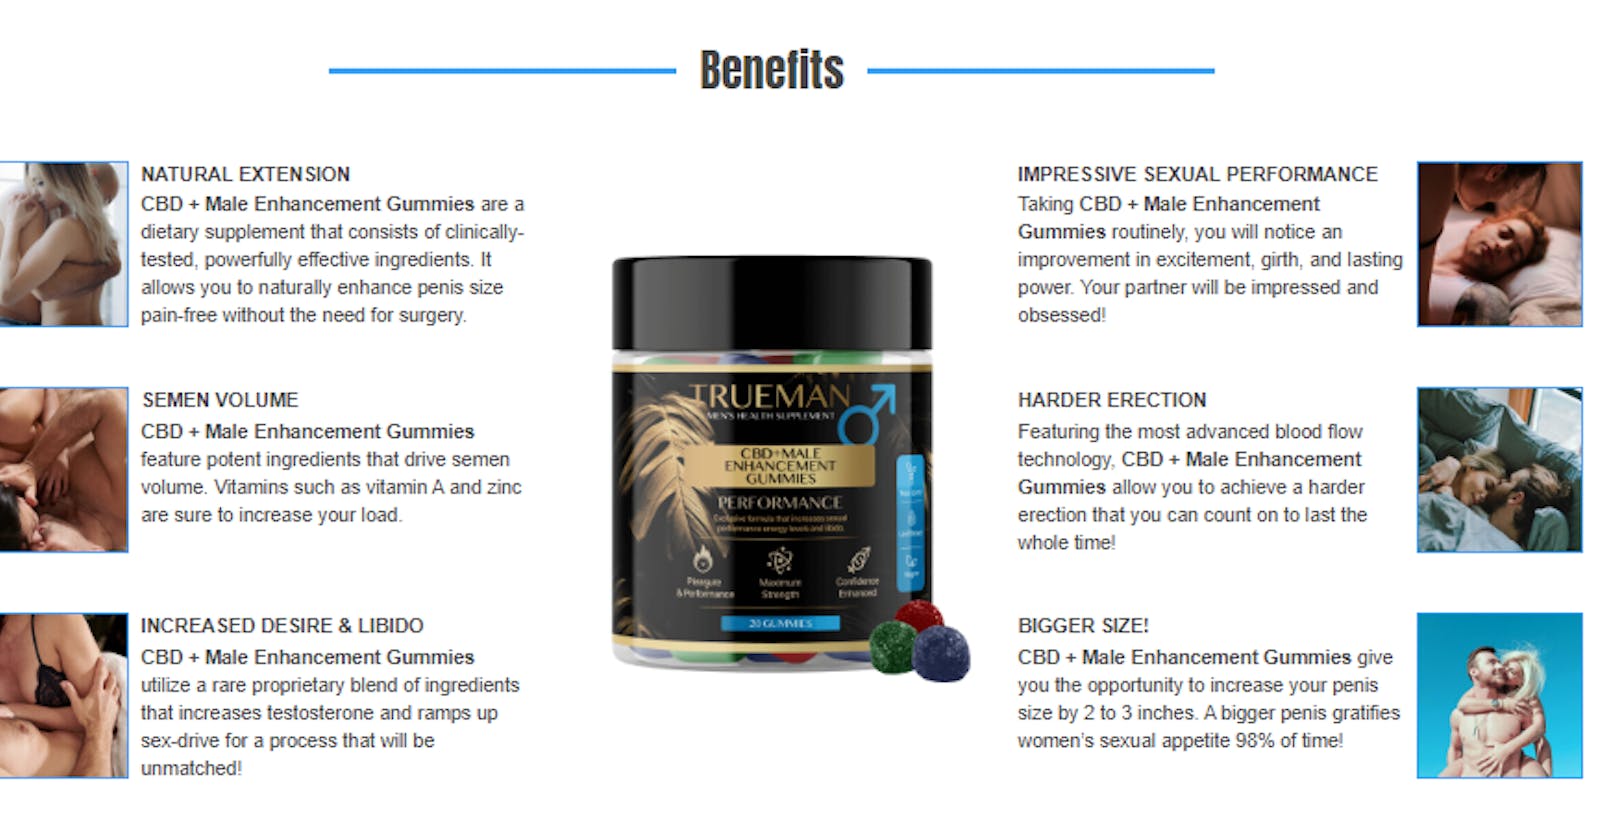 Apollo Male Enhancement Gummies Better Performance & More significant Stamina!